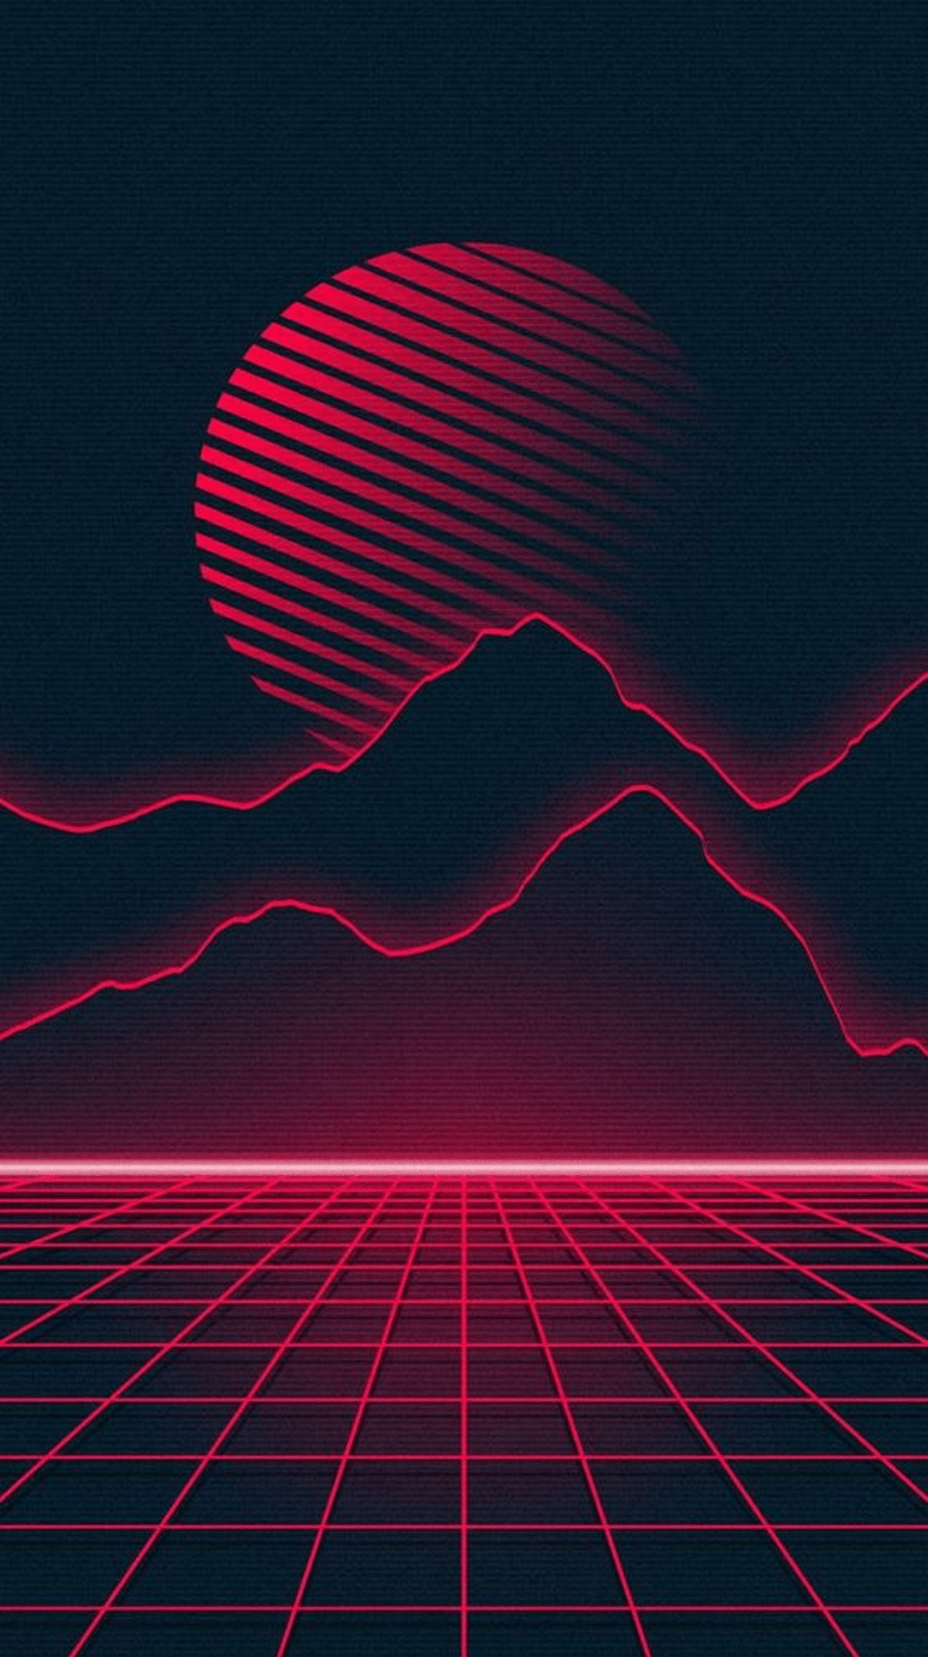 Red and Black Vaporwave Phone Wallpaper For Tech